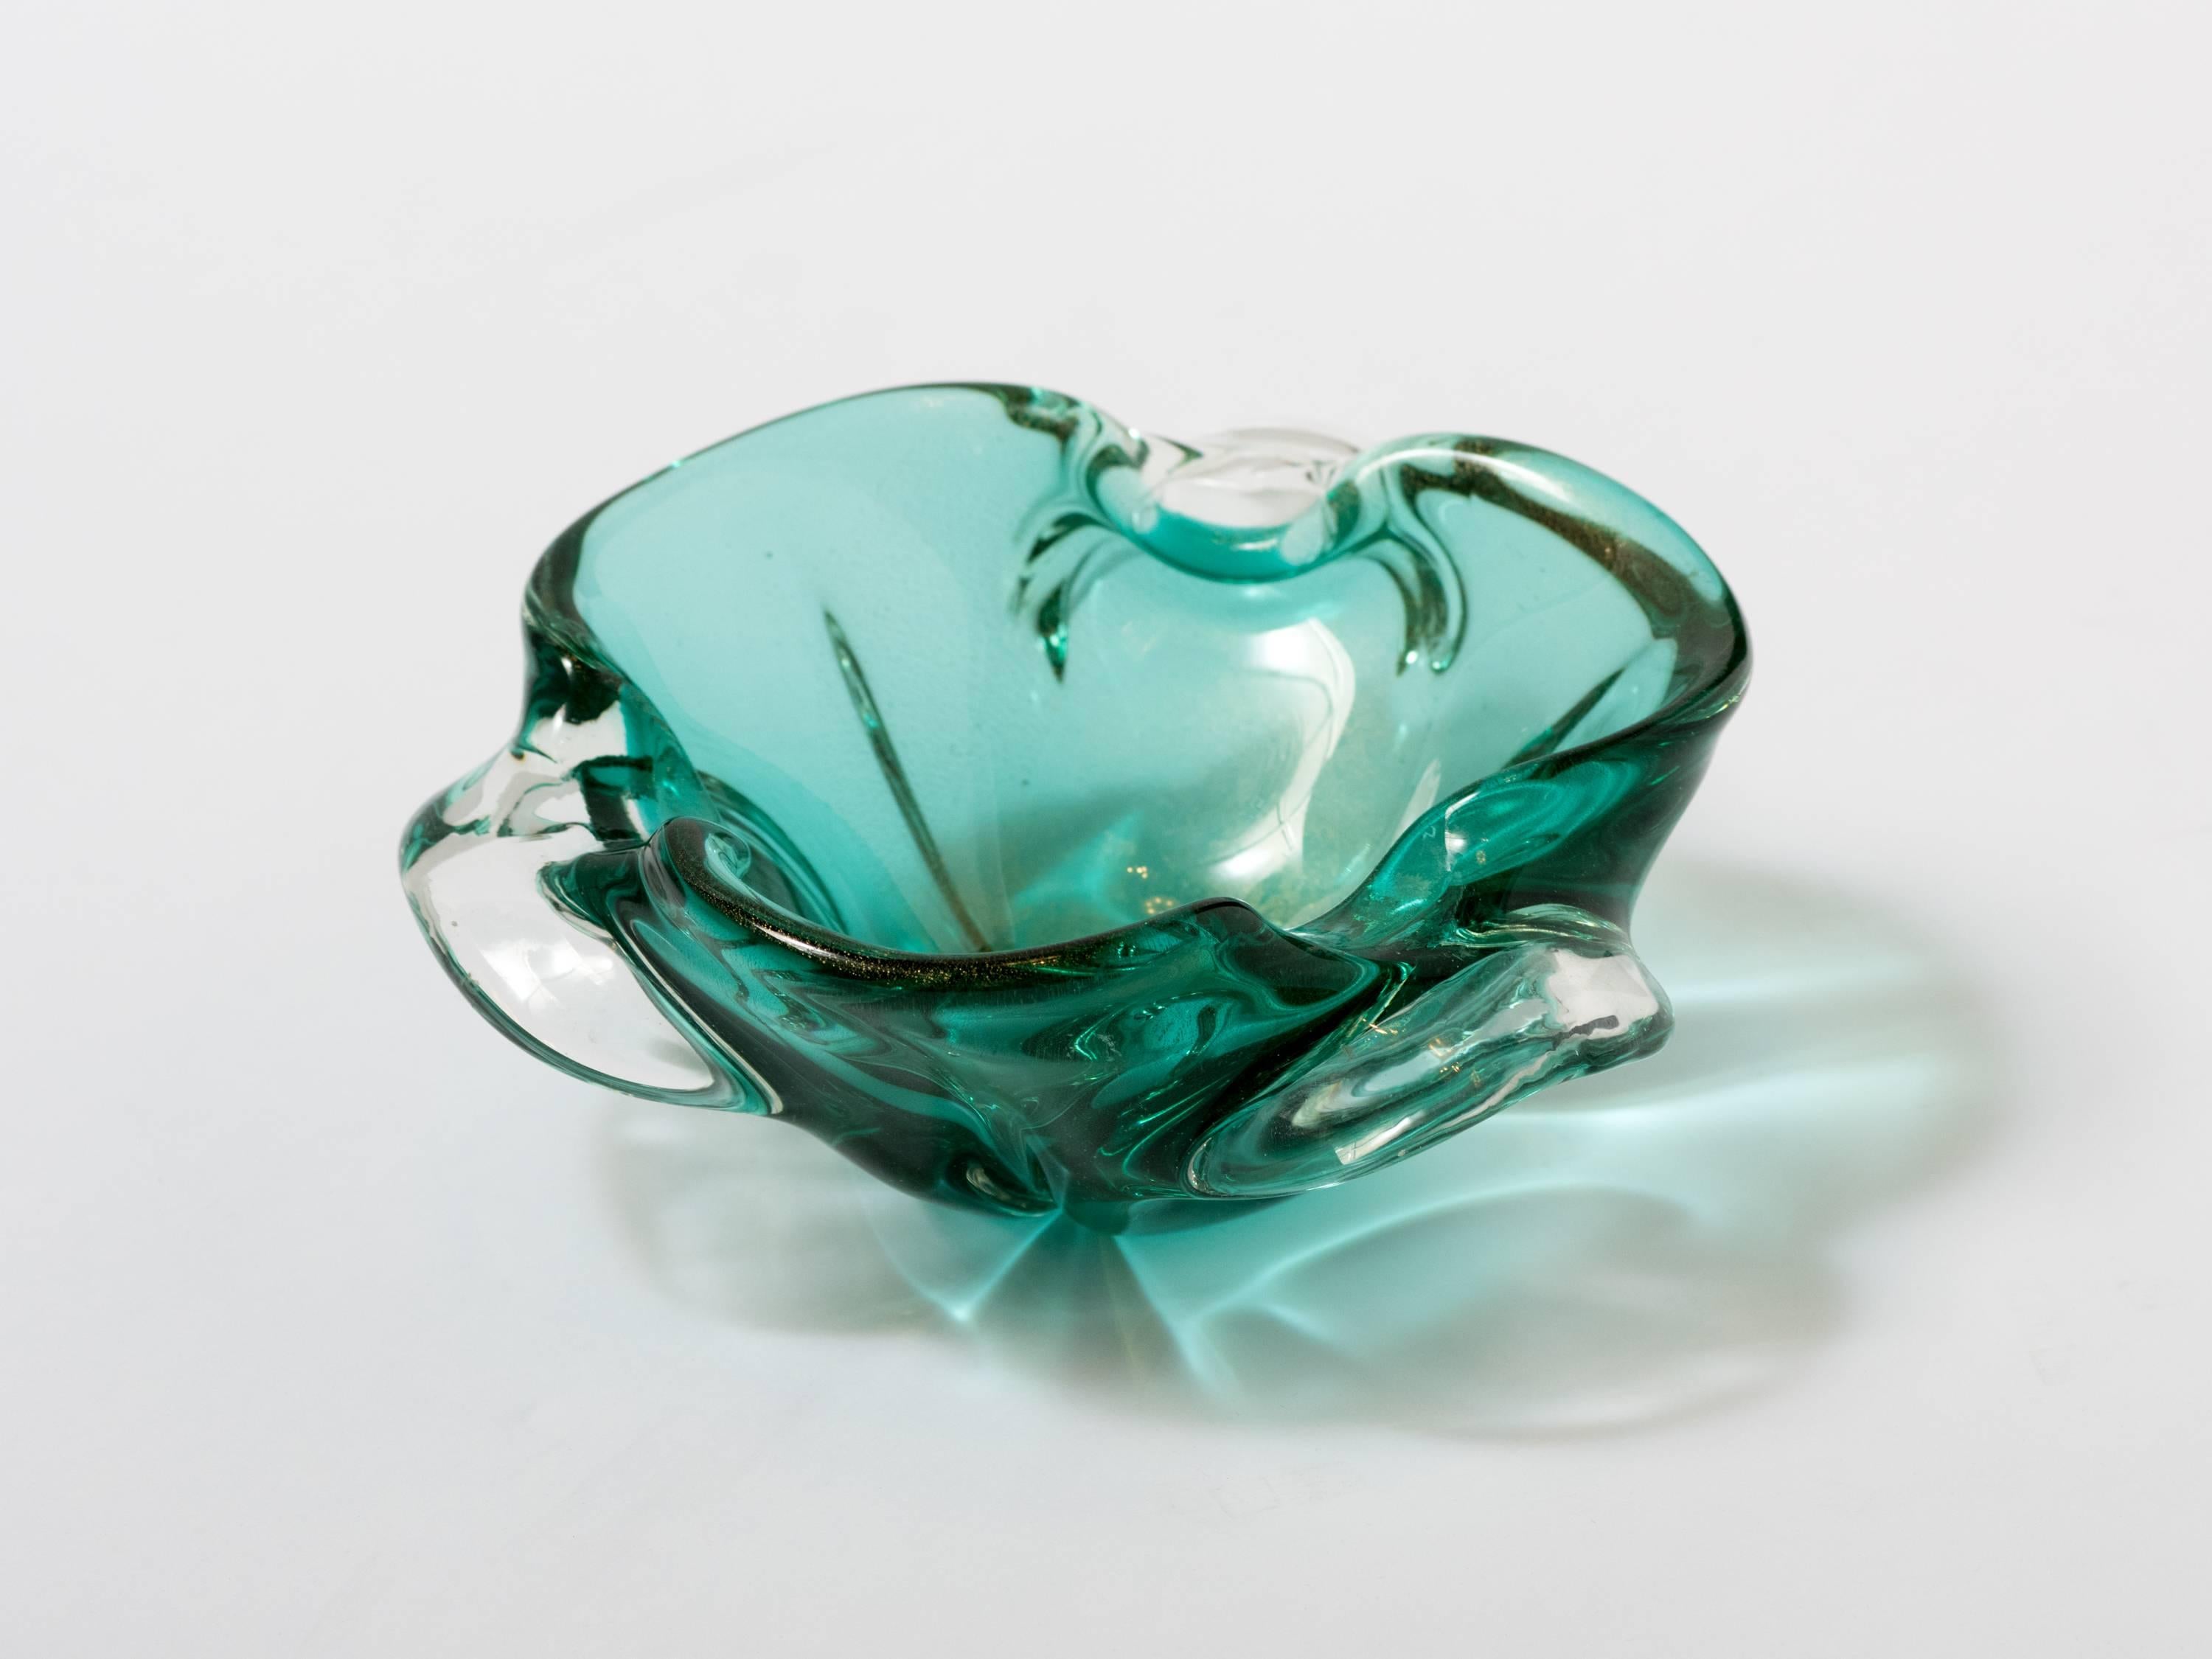 Hand-Crafted Seguso Mid-Century Murano Bowl in Emerald Green